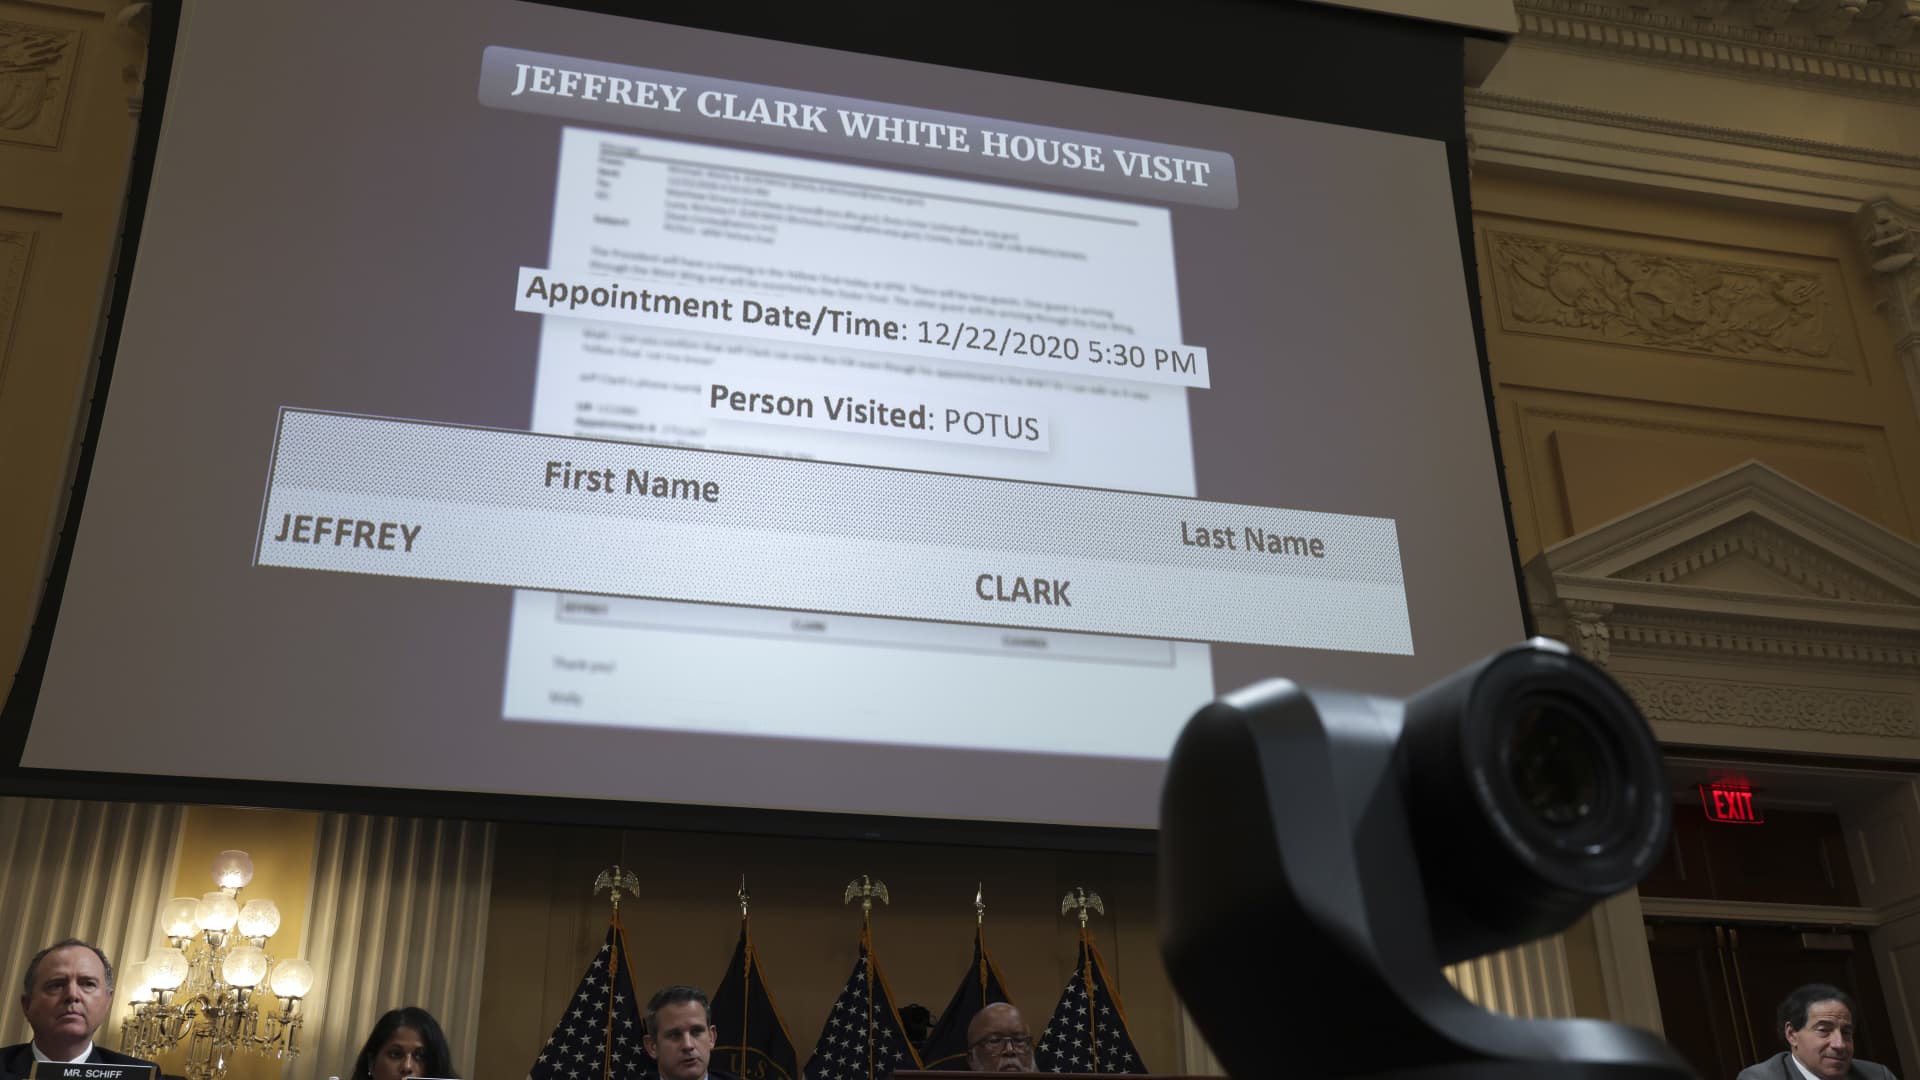 A image displaying a White House visitor log for Jeffrey Clark is displayed during the fifth hearing by the House Select Committee to Investigate the January 6th Attack on the U.S. Capitol in the Cannon House Office Building on June 23, 2022 in Washington, DC.